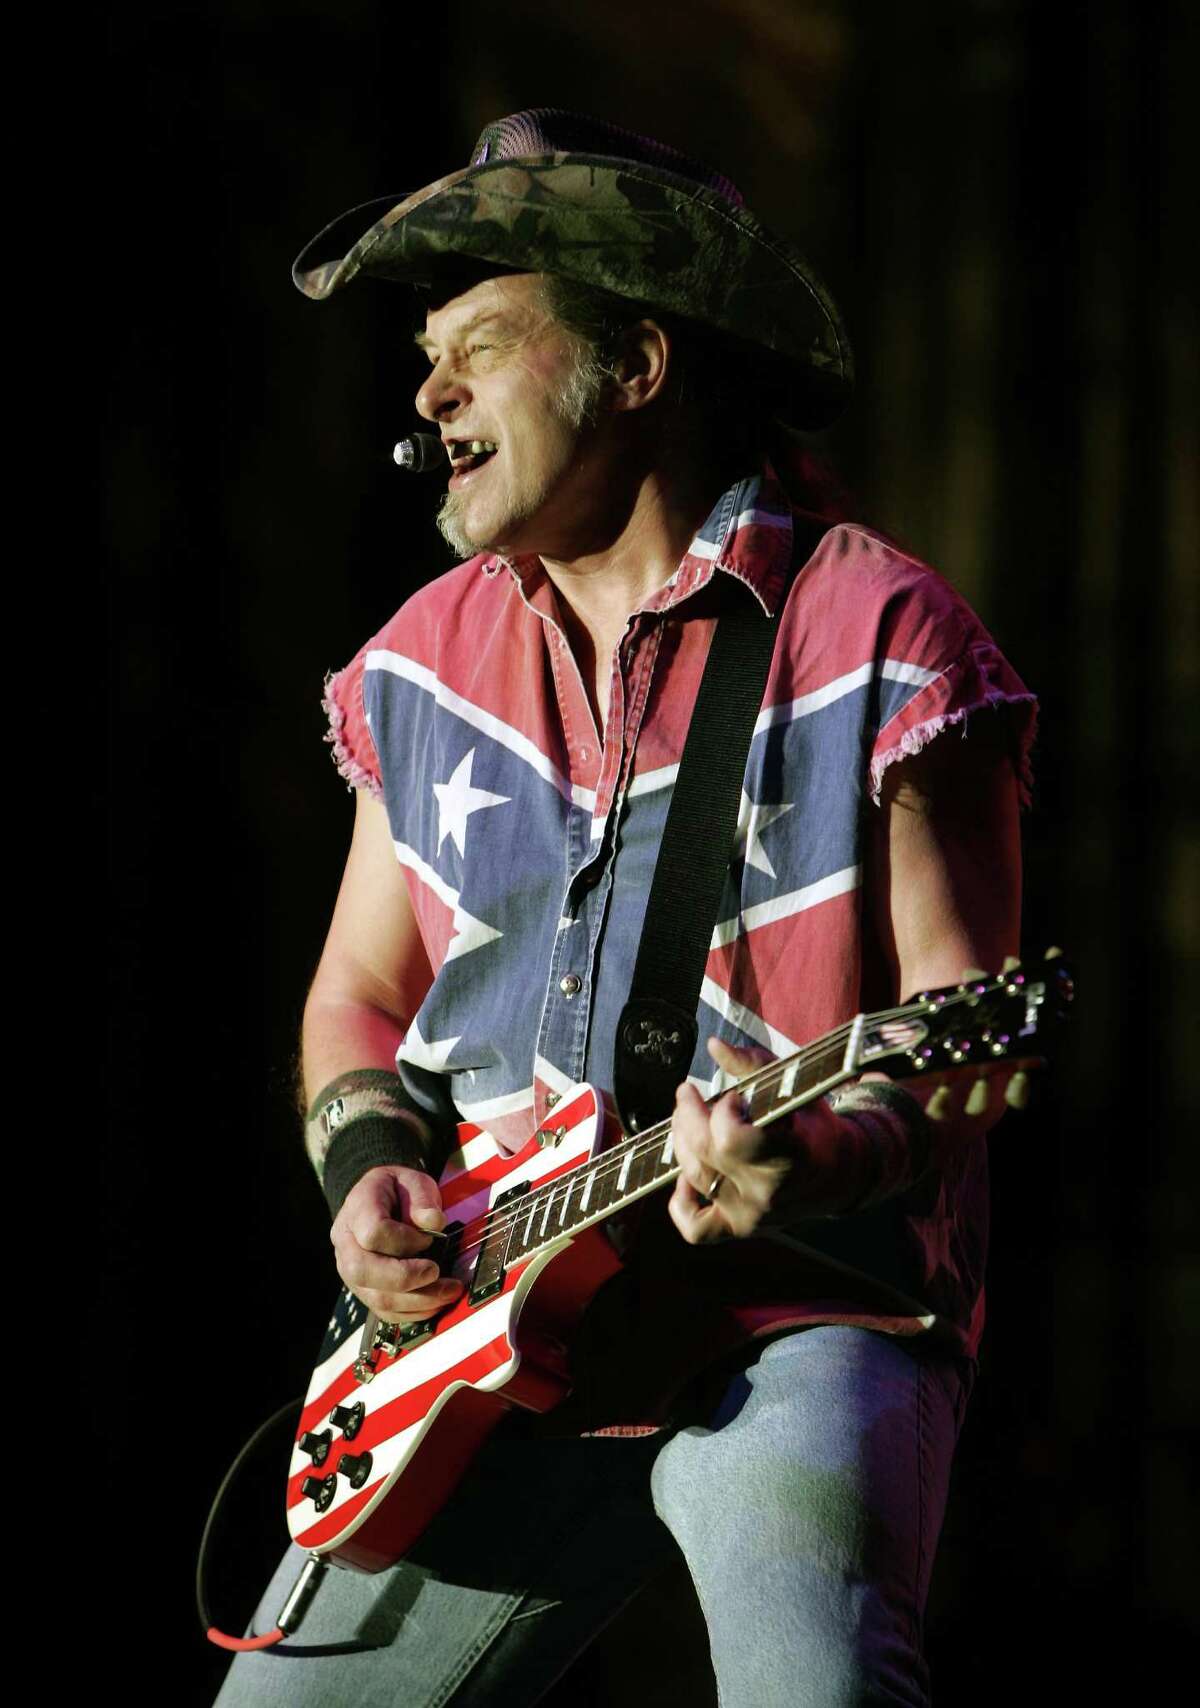 A reader asks that rocker Ted Nugent understand why law enforcement and others may be concerned when “a heavily armed individual makes public statements that appear to constitute a paranoid rant.”